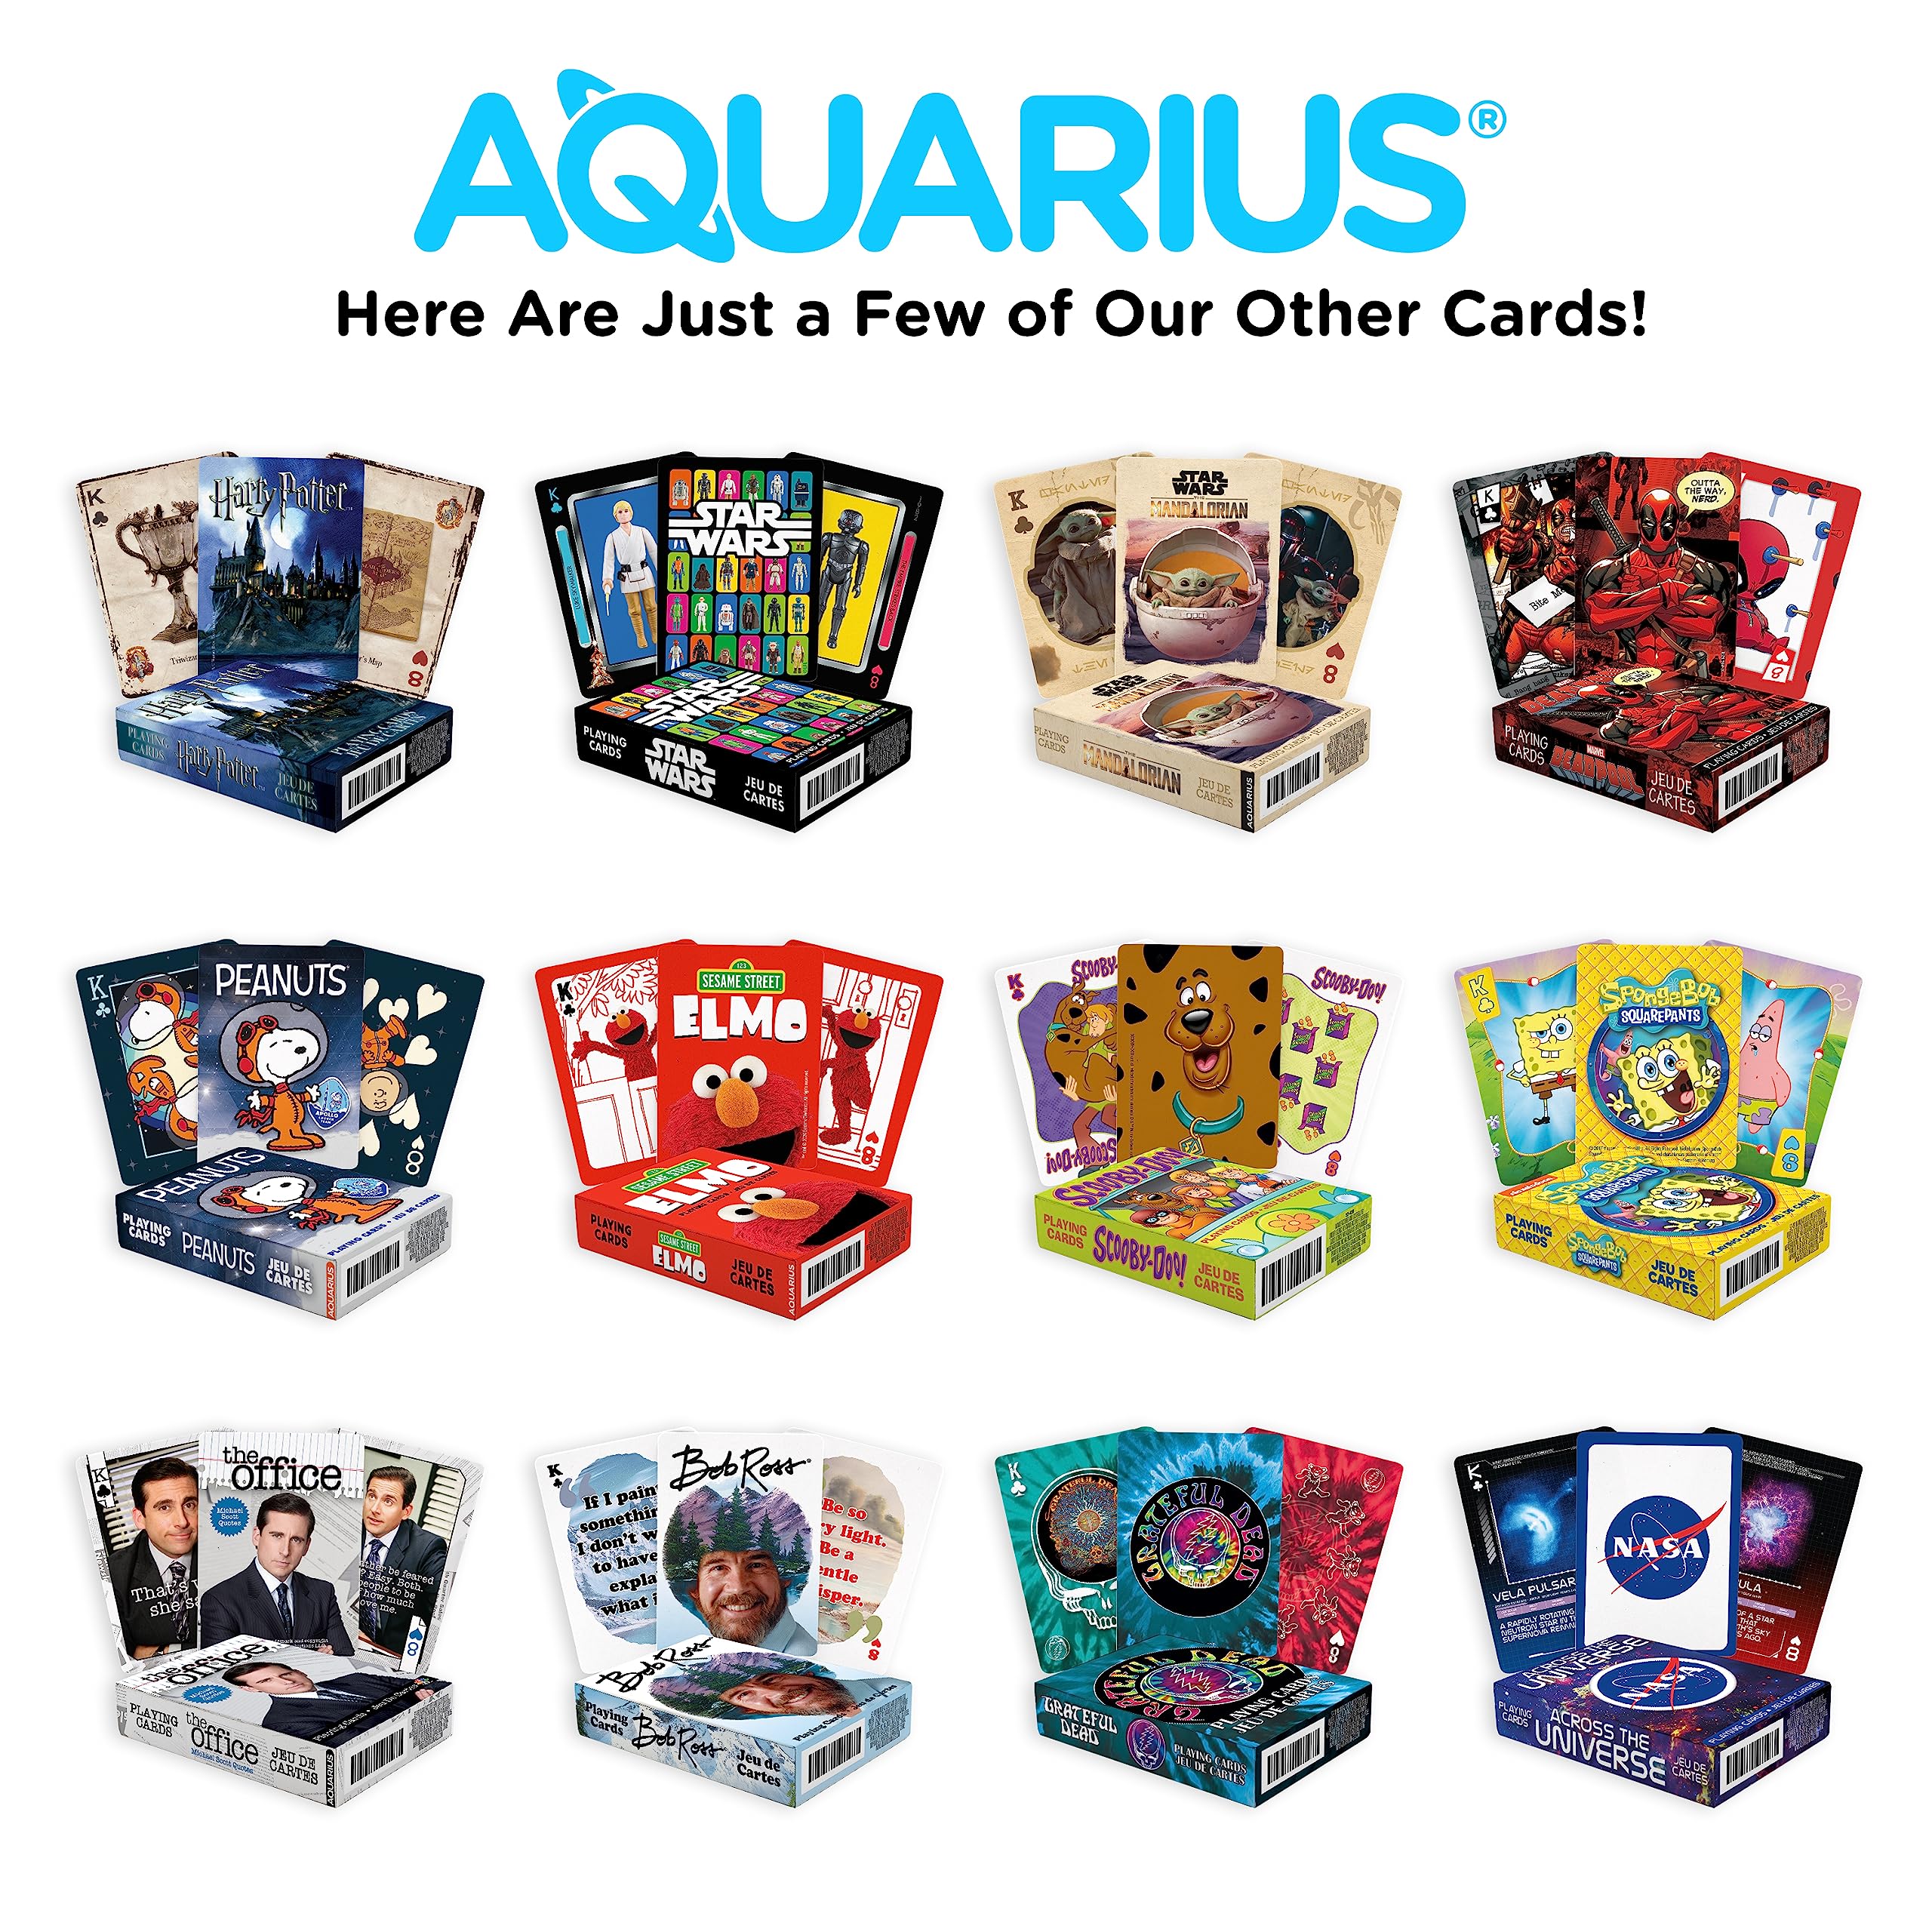 Aquarius Bento Box Playing Cards -Bento Box Themed Deck of Cards for Your Favorite Card Games - Officially Licensed Merchandise & Collectibles, 2.5 x 3.5